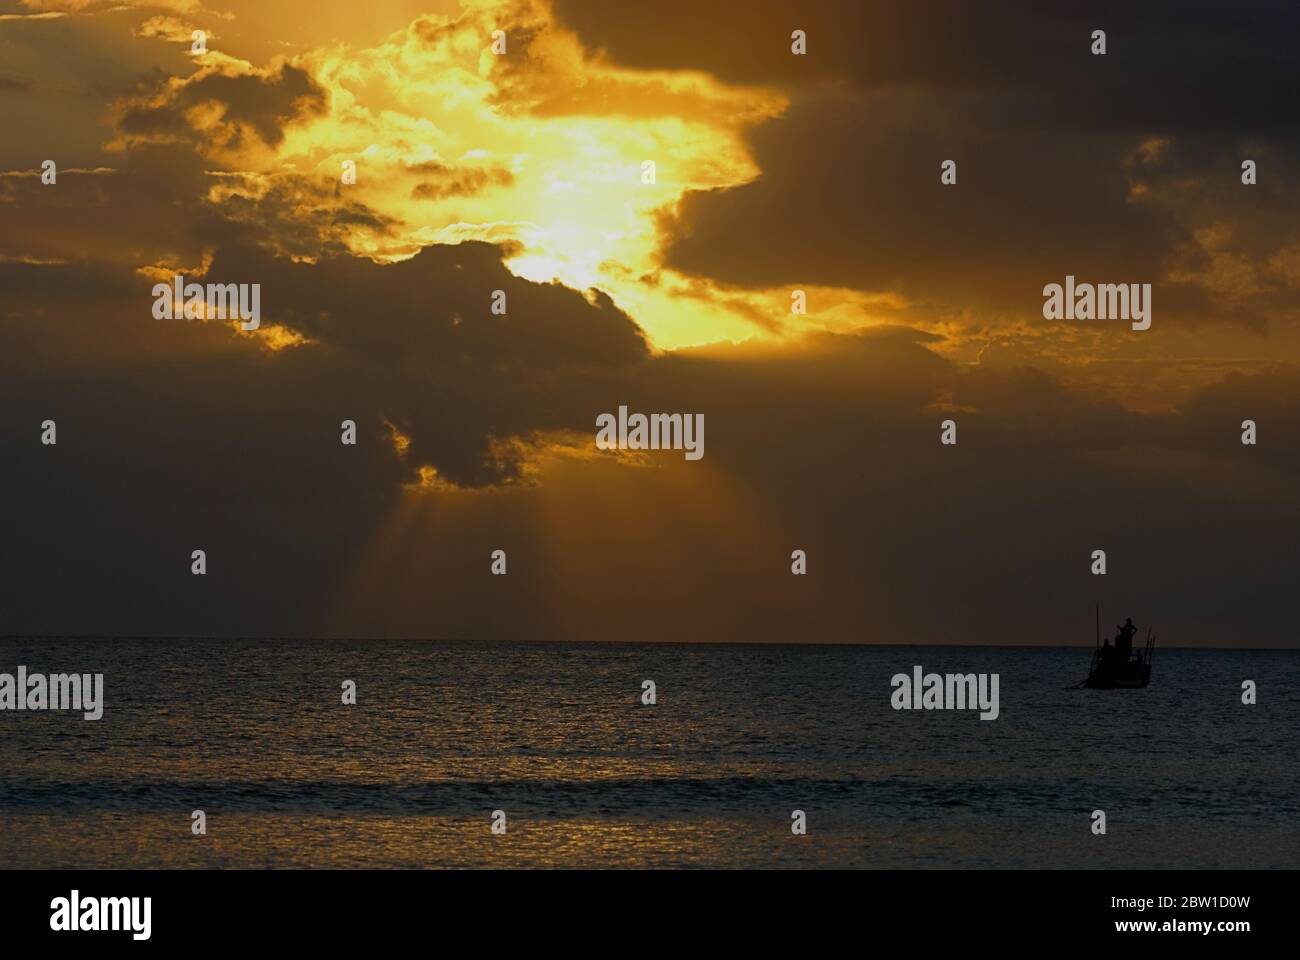 A fishing boat floating on the sea, with rays of light, seen from Batu Termanu, Rote Island, Indonesia. Stock Photo